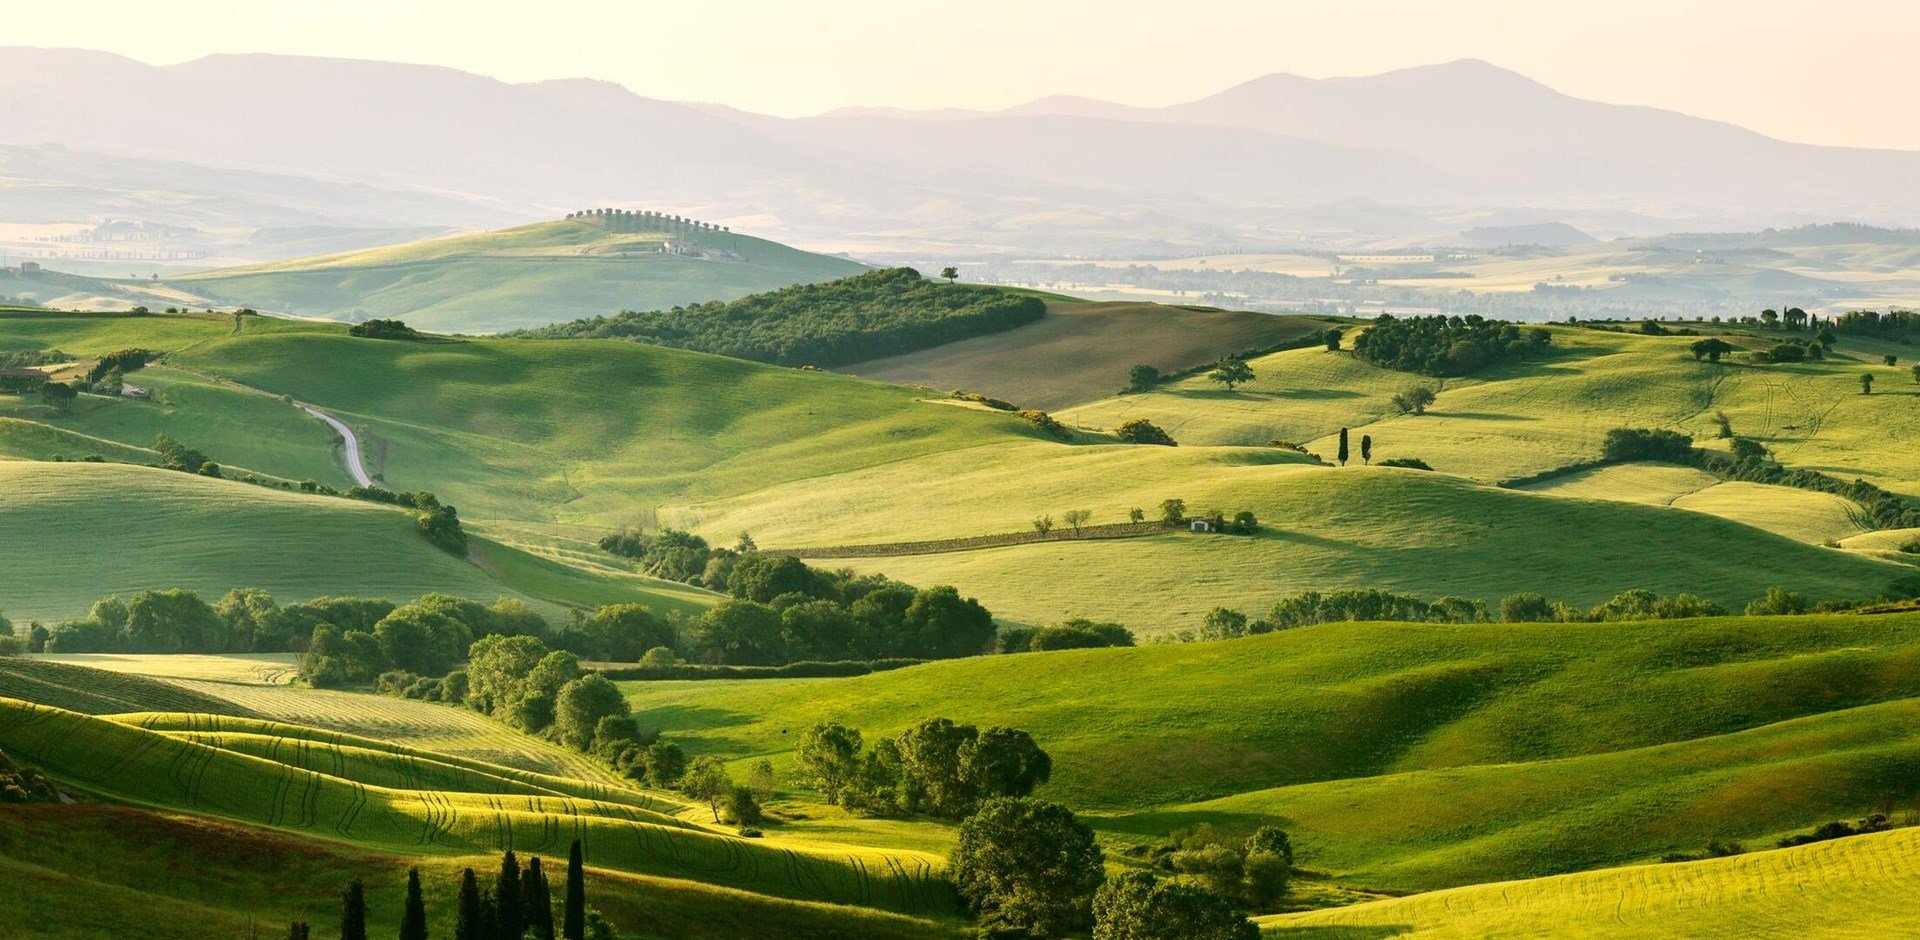 Beautiful and miraculous colors of green spring panorama landscape of Tuscany, Italy.